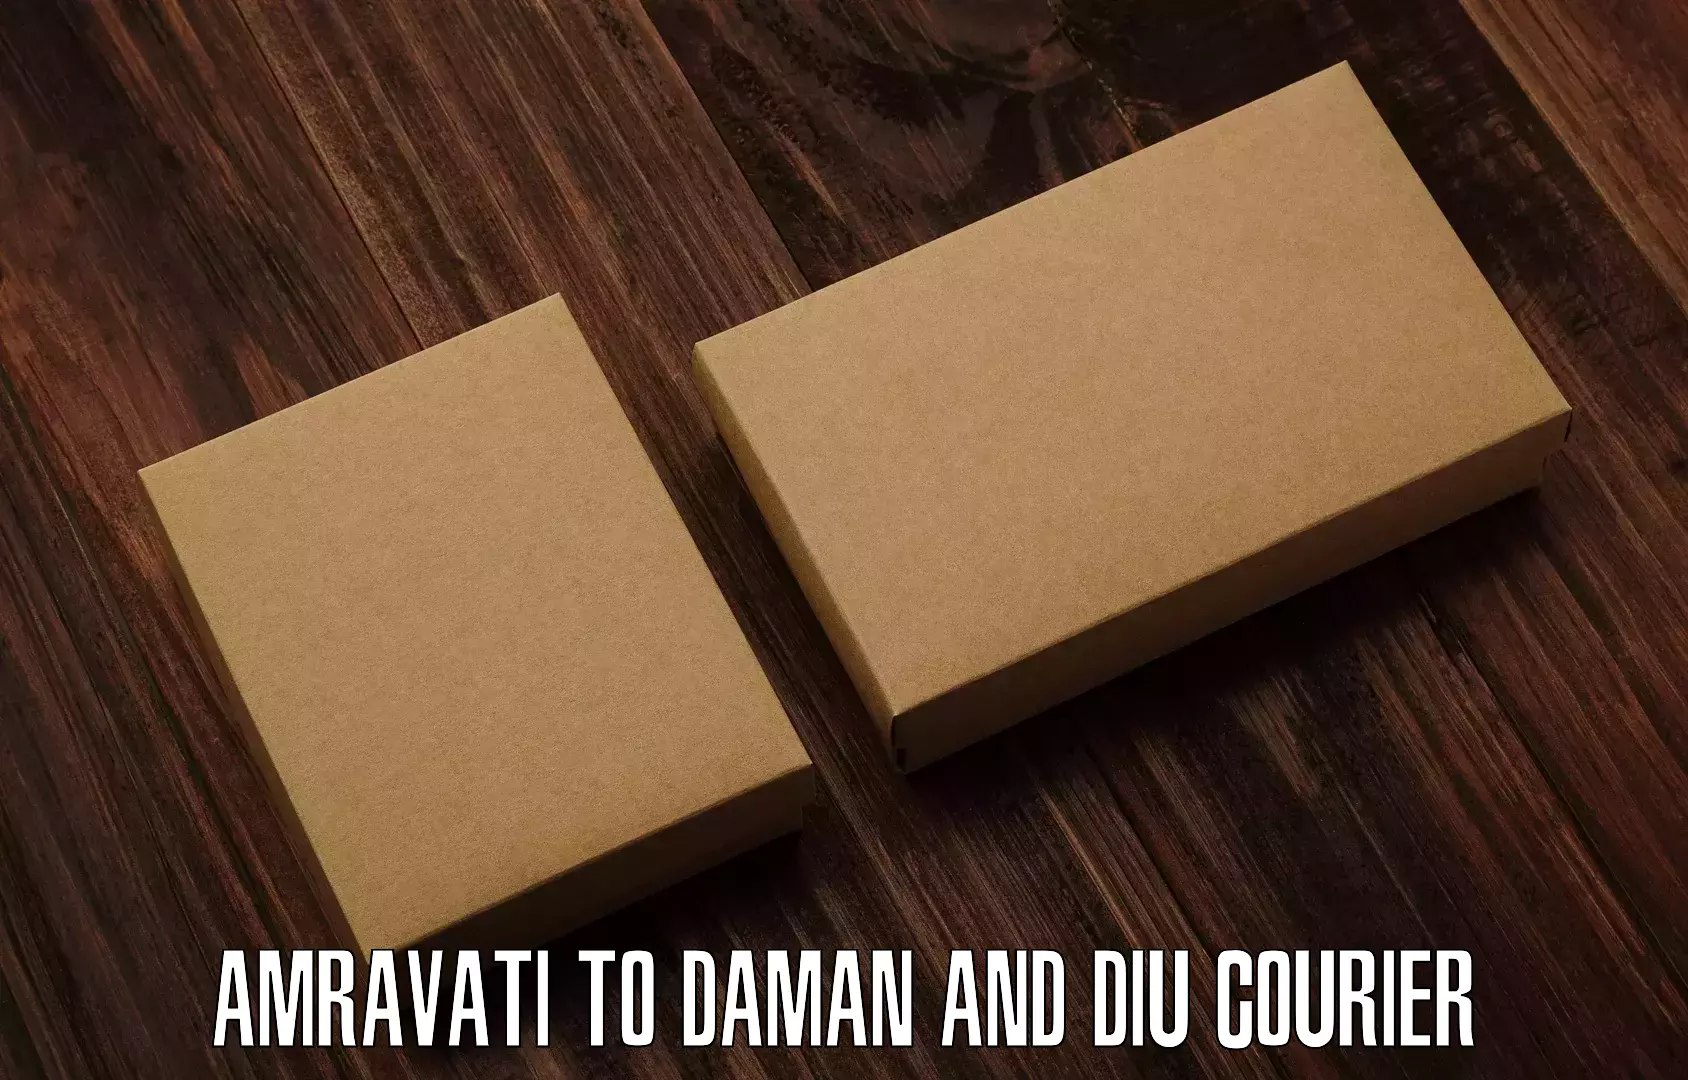 End-to-end delivery Amravati to Daman and Diu